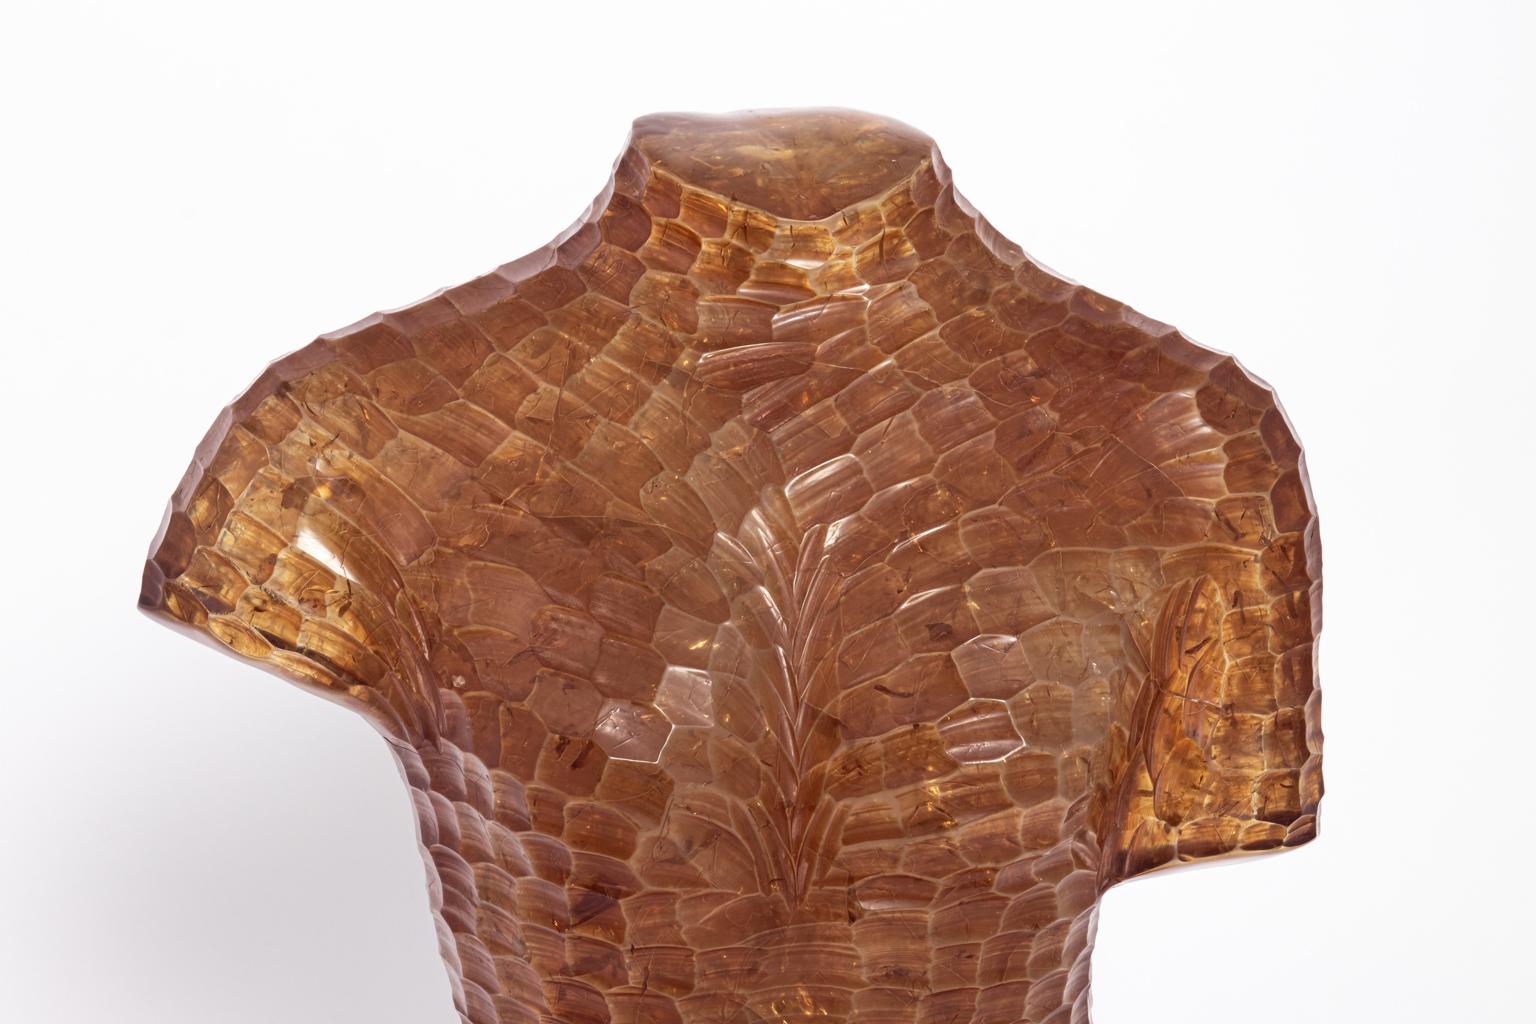 contemporary Lucite and Resin torso, circa 1970s. Please note of wear consistent with age.